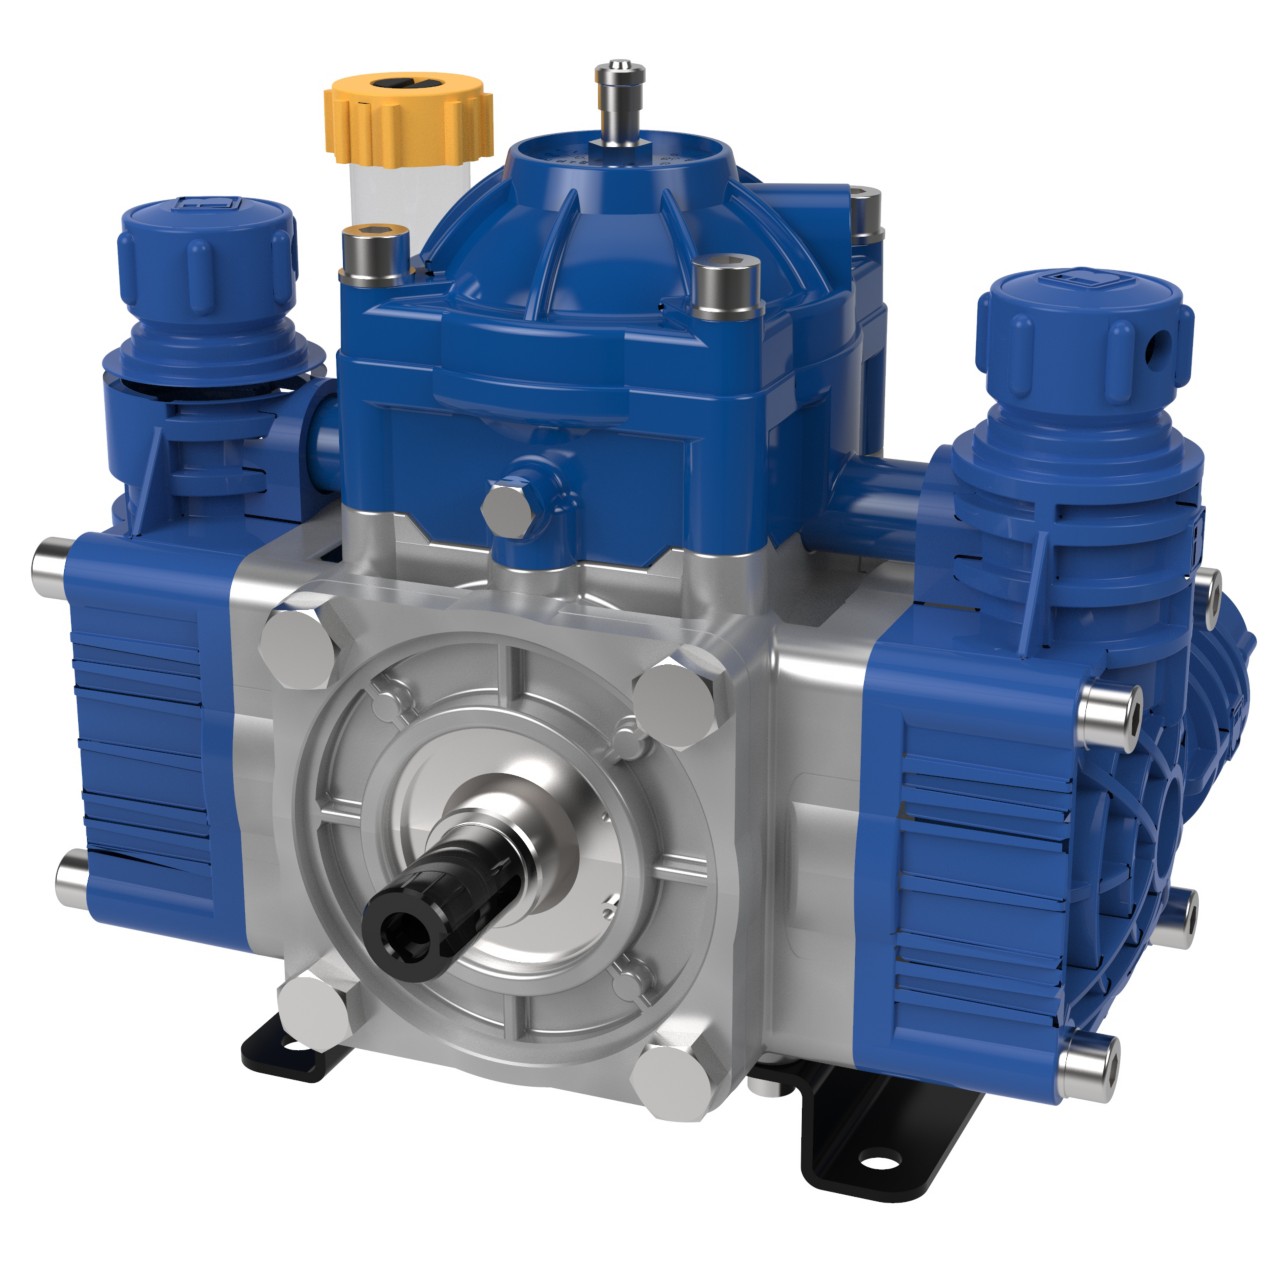 Picture of Diaphragm Pump, Pump ONLY, Medium Pressure, Poly Body, 6.3 GPM, 290 PSI, 650 RPM,  3/4" Solid Shaft, 1" Inlet, 1/2" Outlet, 2 HP